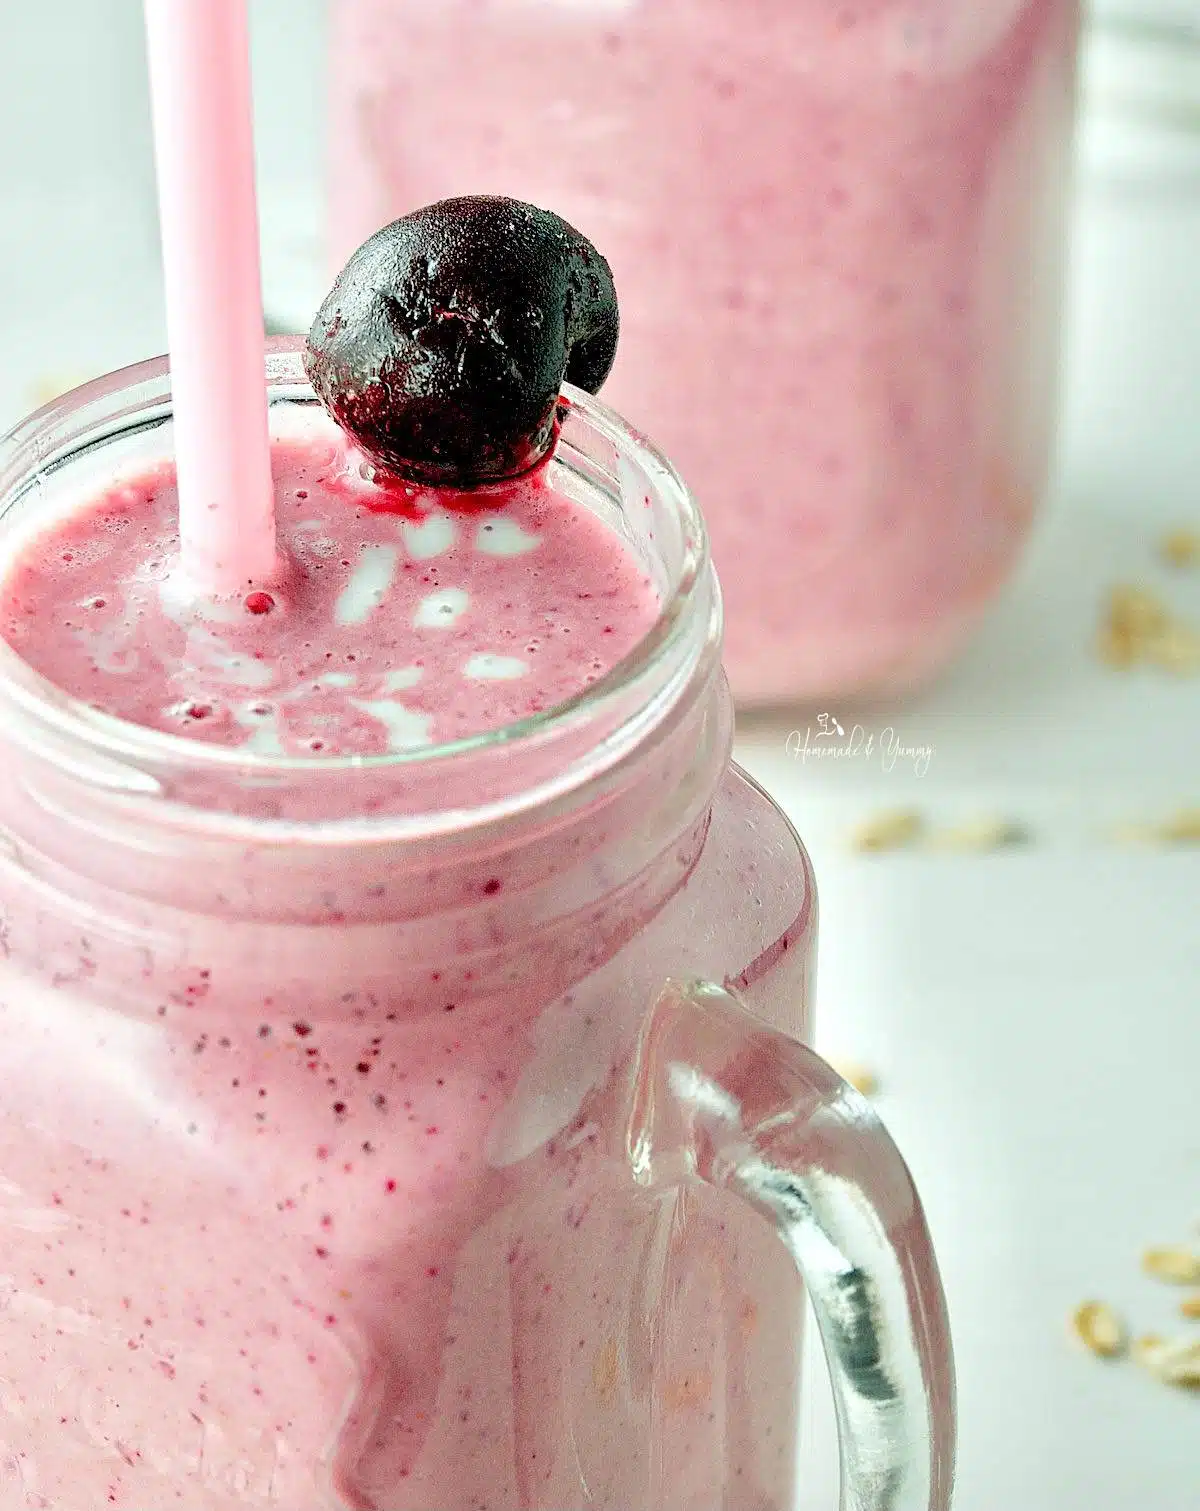 Cherry and fig smoothie made with vanilla kefir.